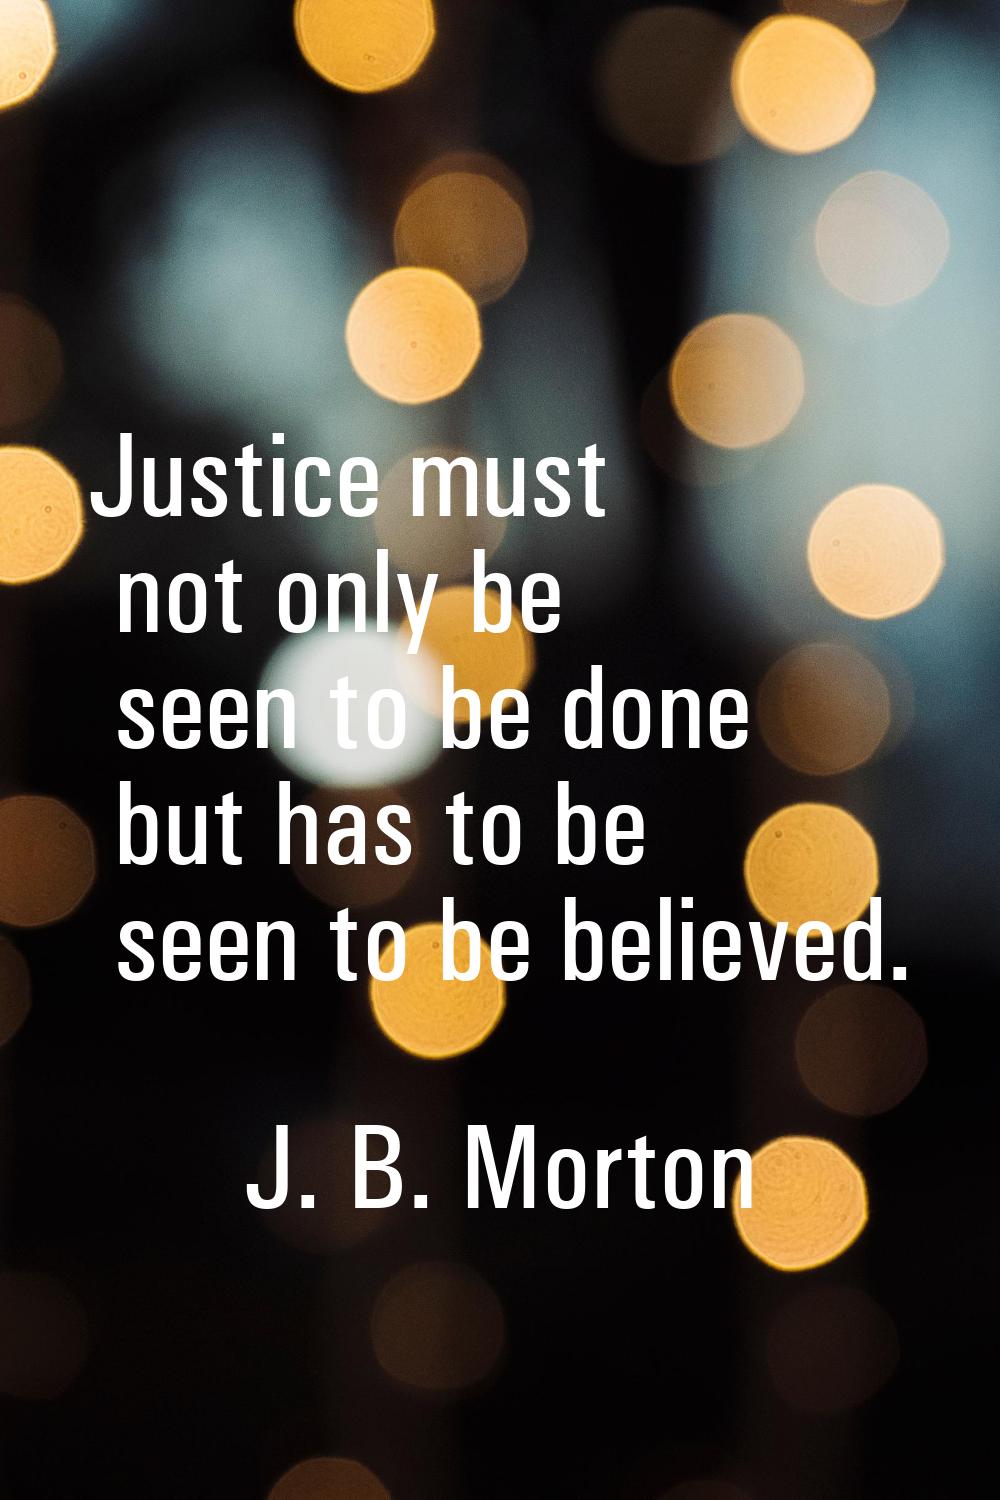 Justice must not only be seen to be done but has to be seen to be believed.